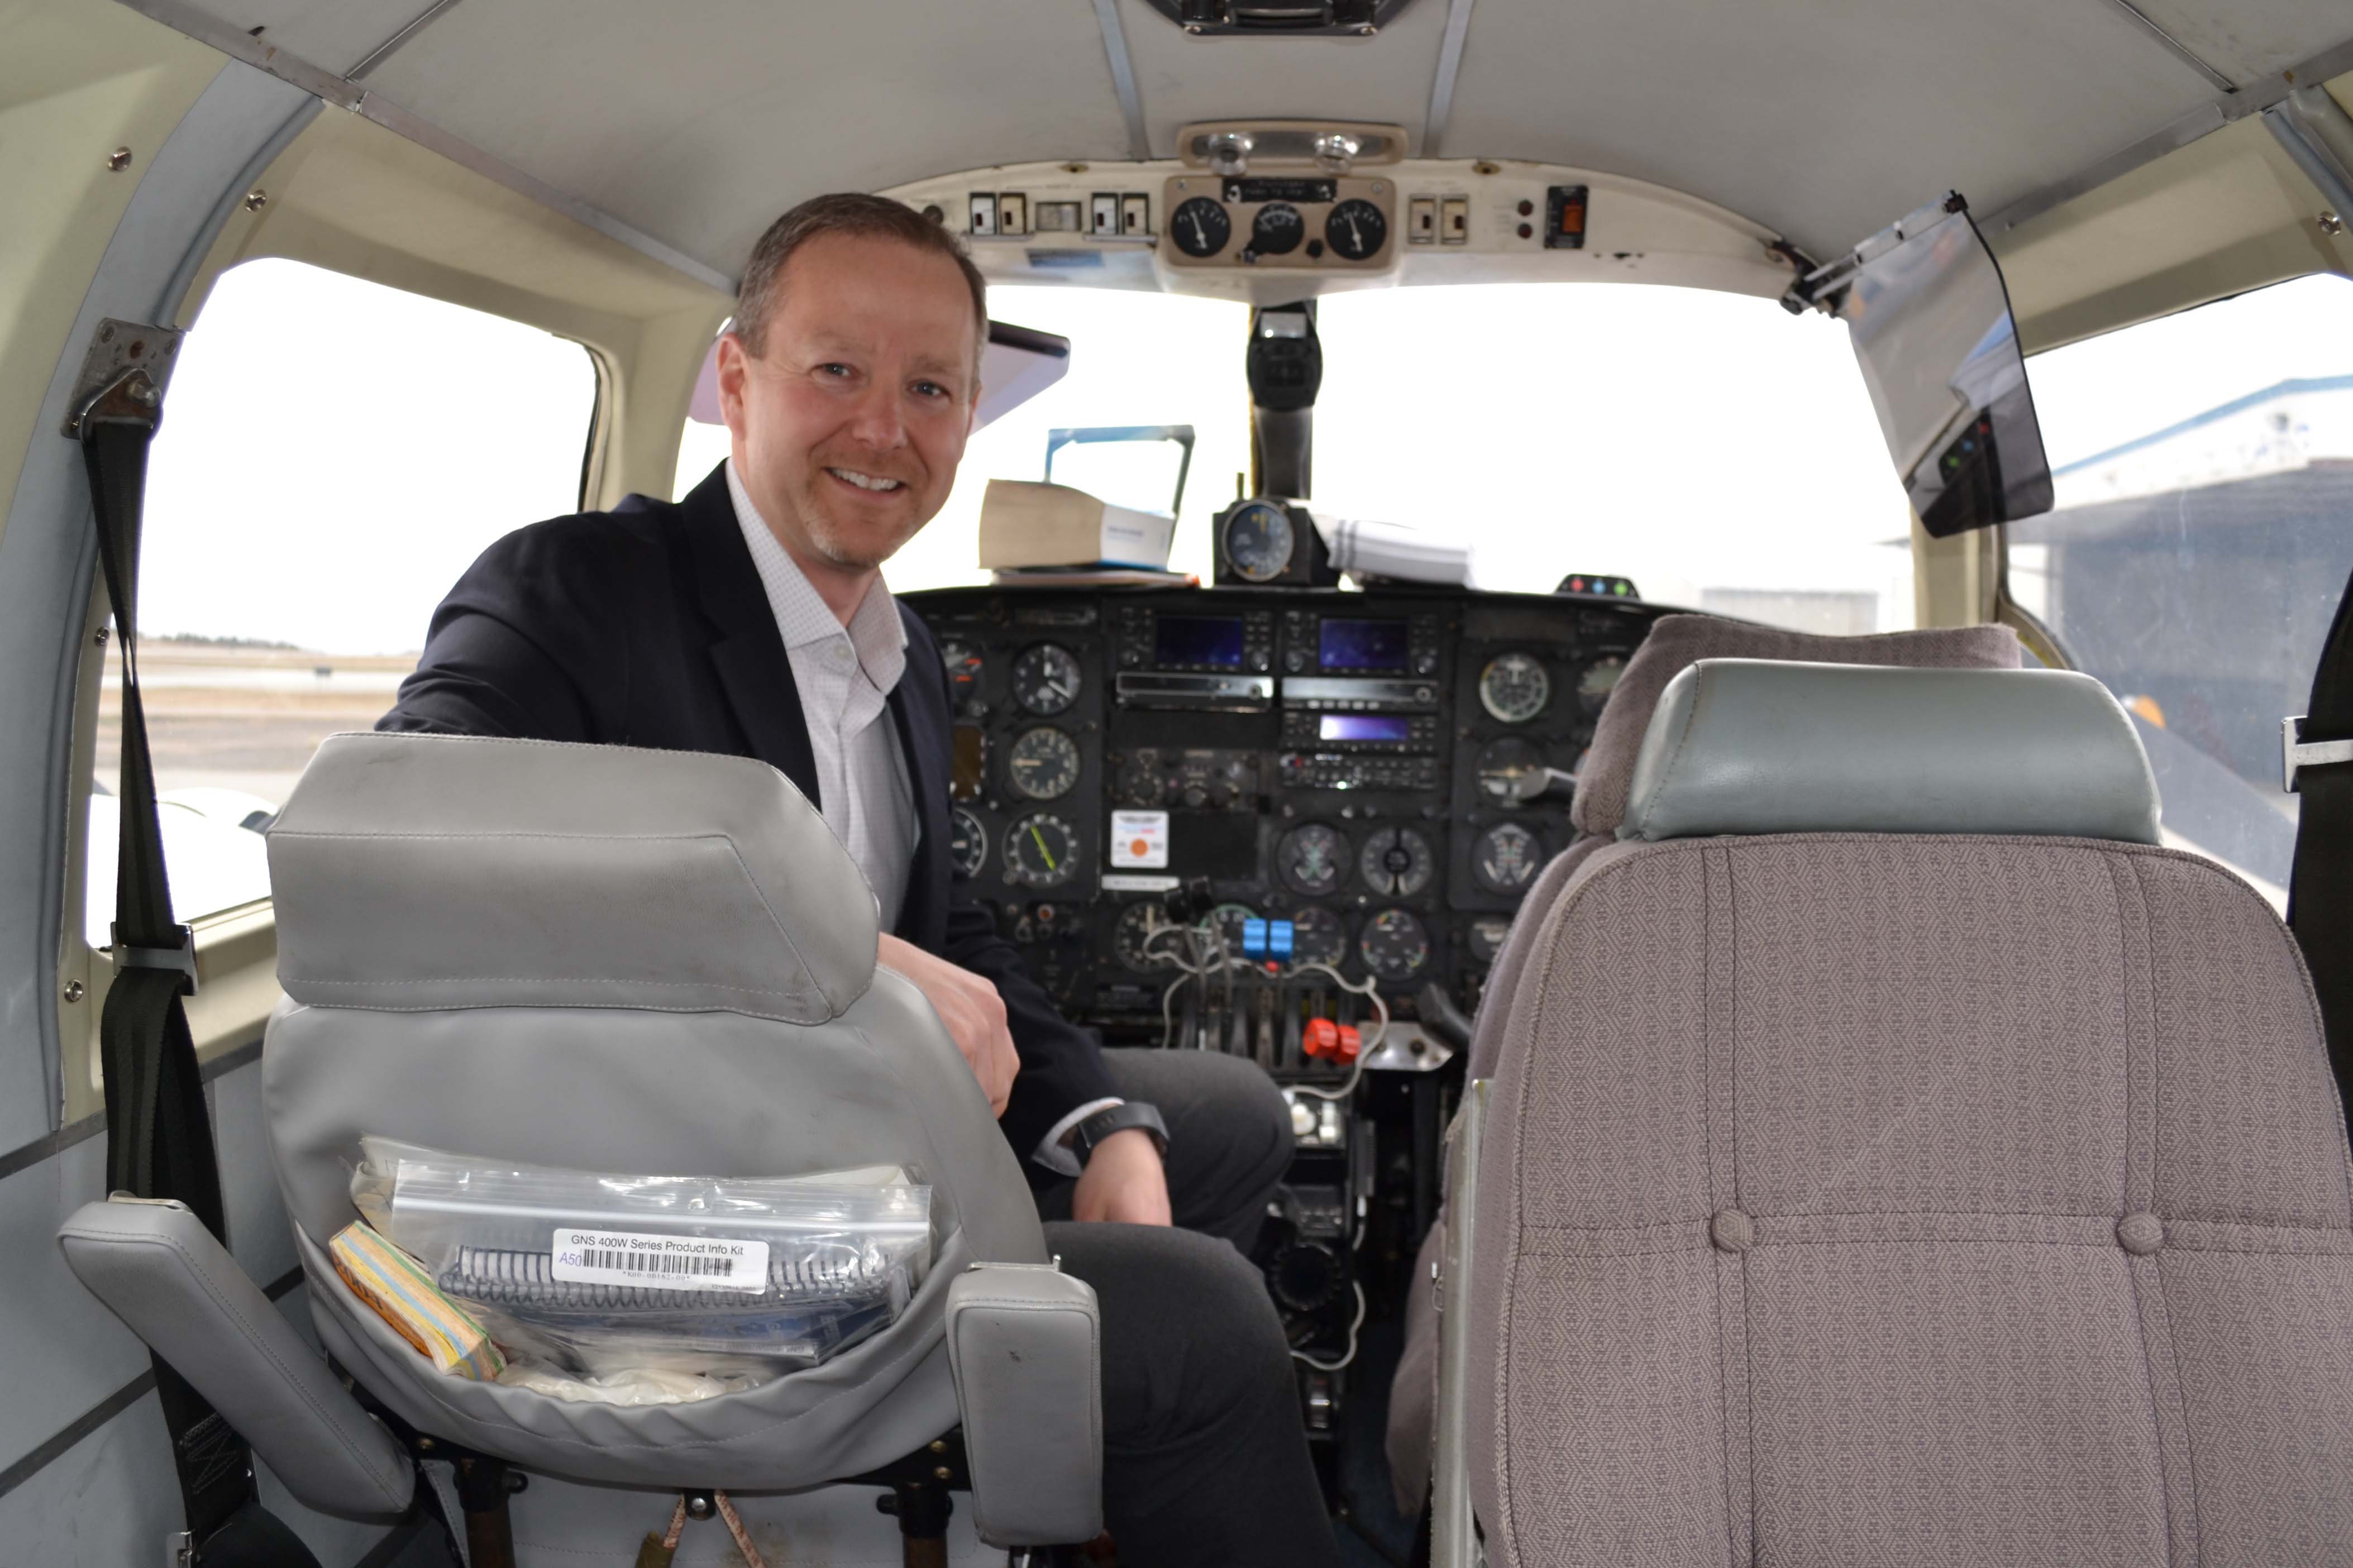 Ryan Mitchell, VP of Saint John Energy, aboard a small aircraft used for MyHEAT's data collection